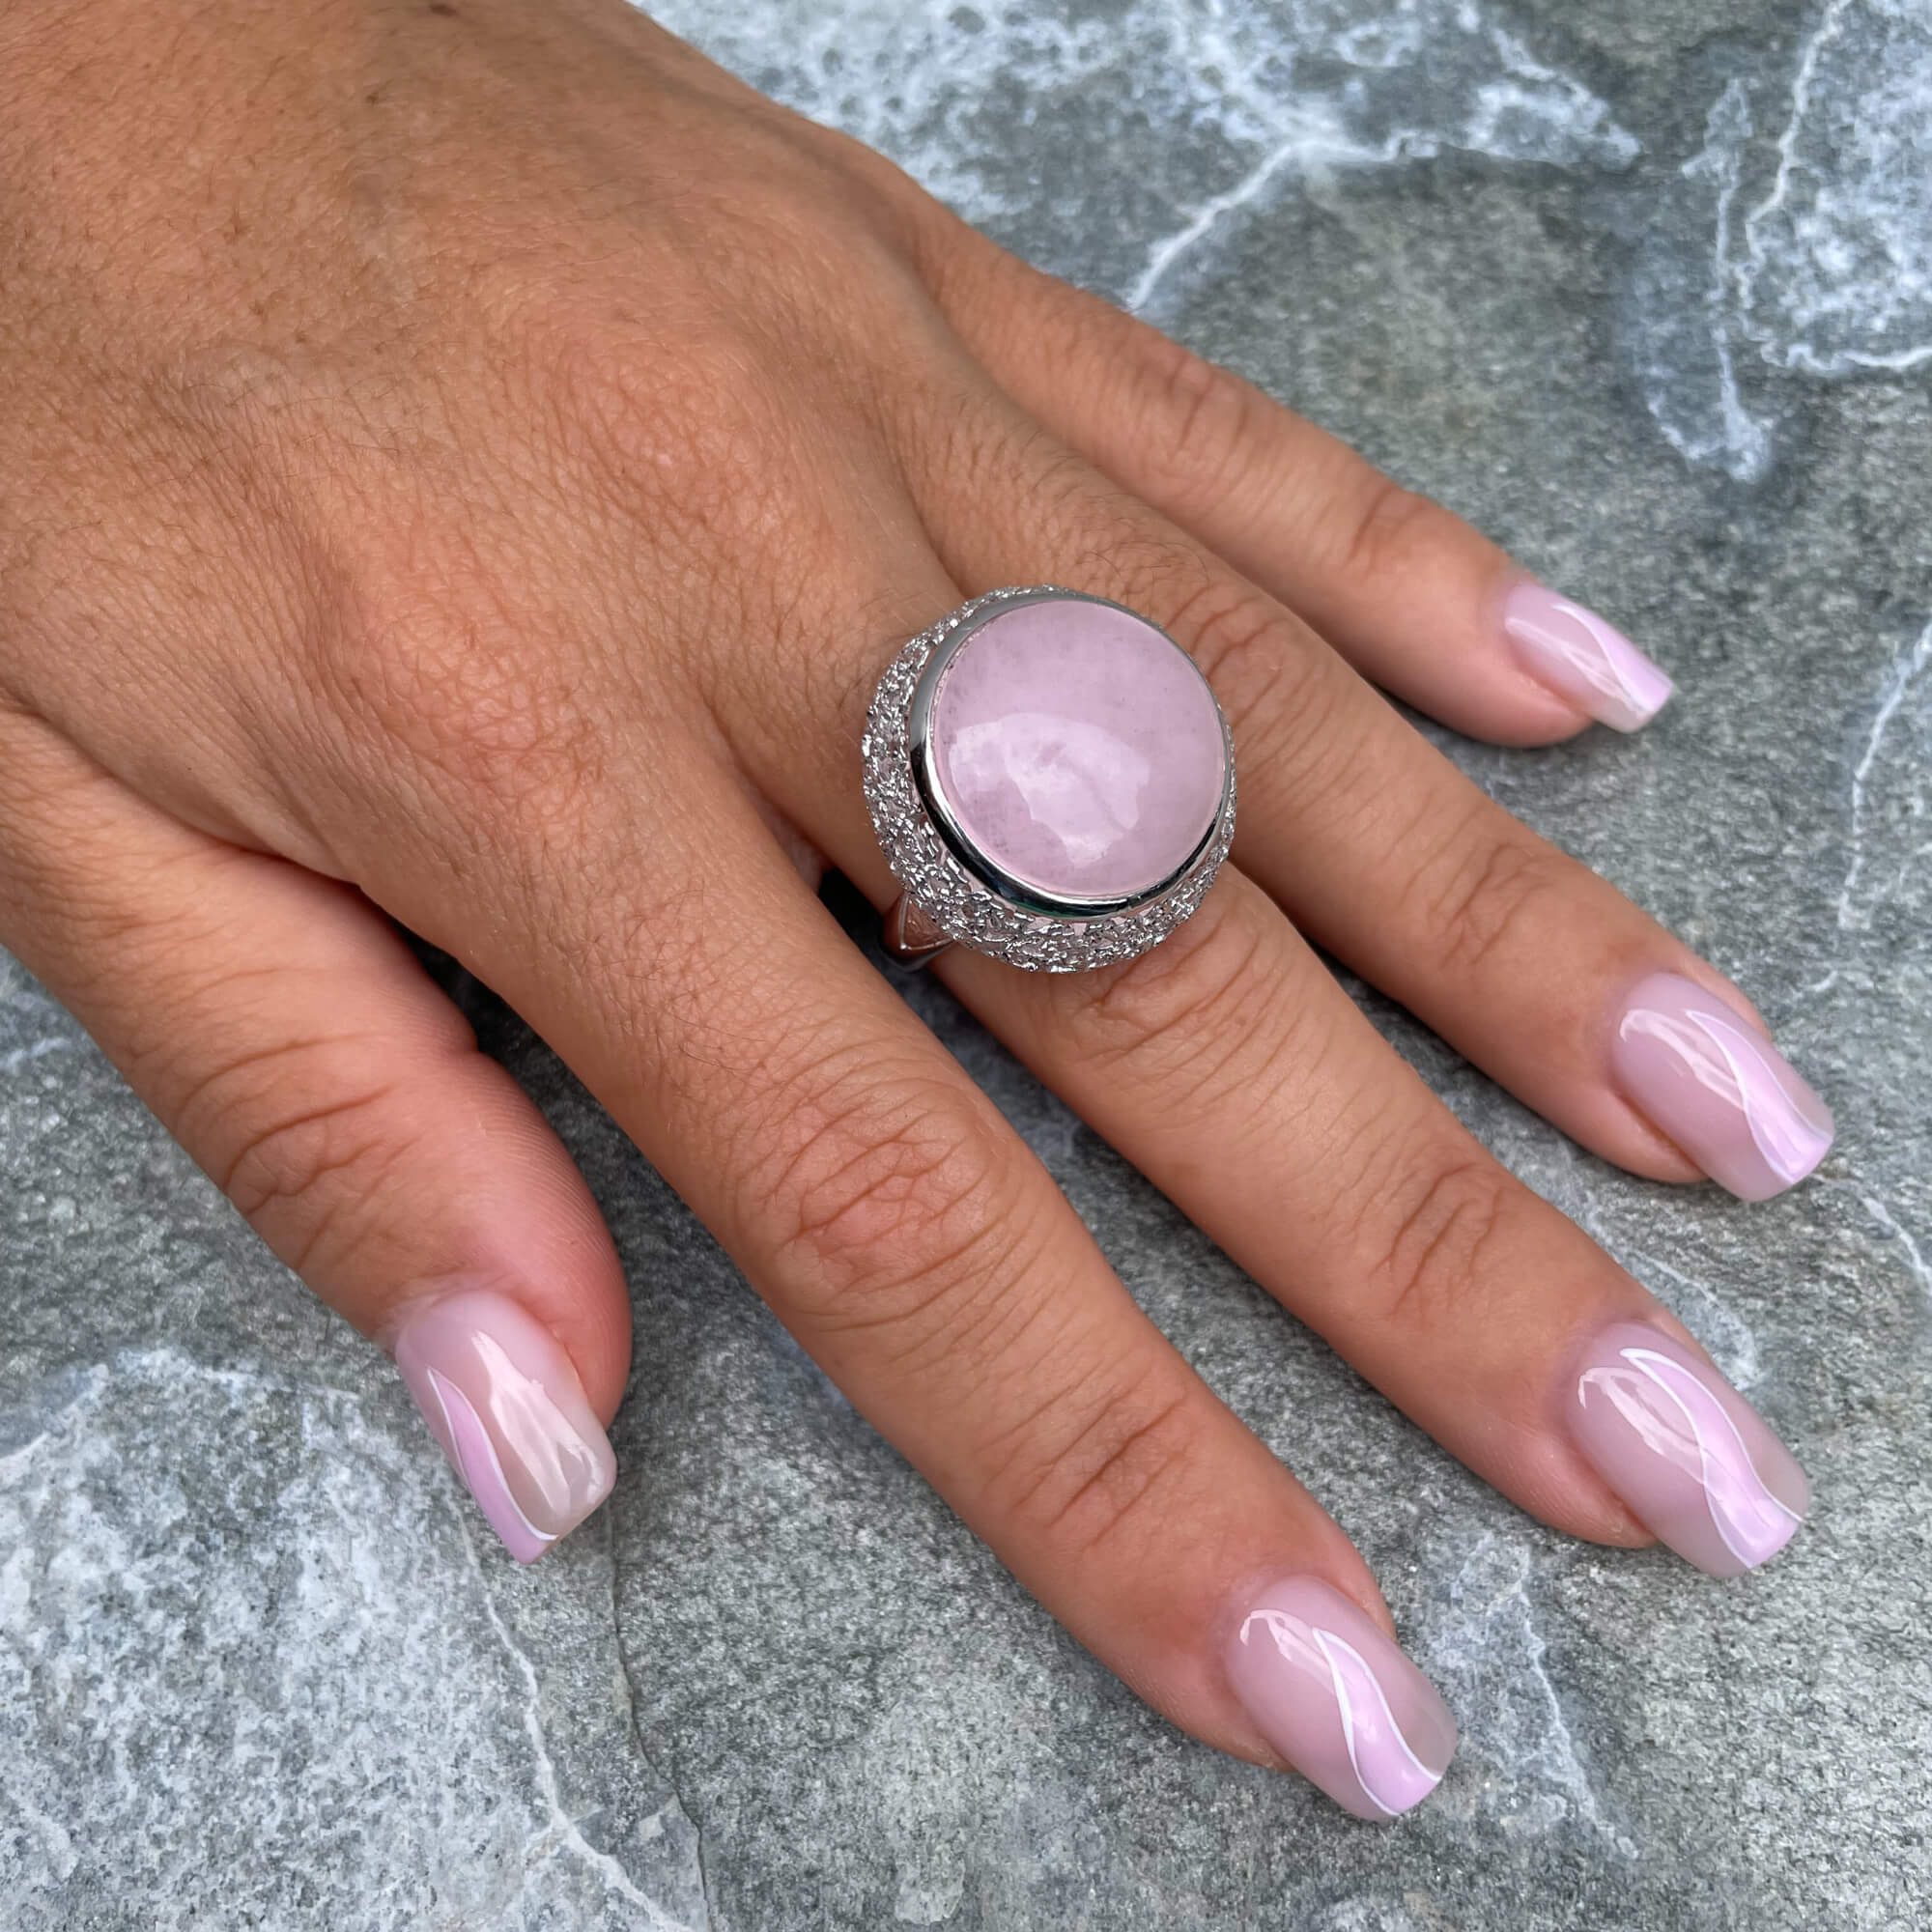 Edited silver ring with a pink quartz stone